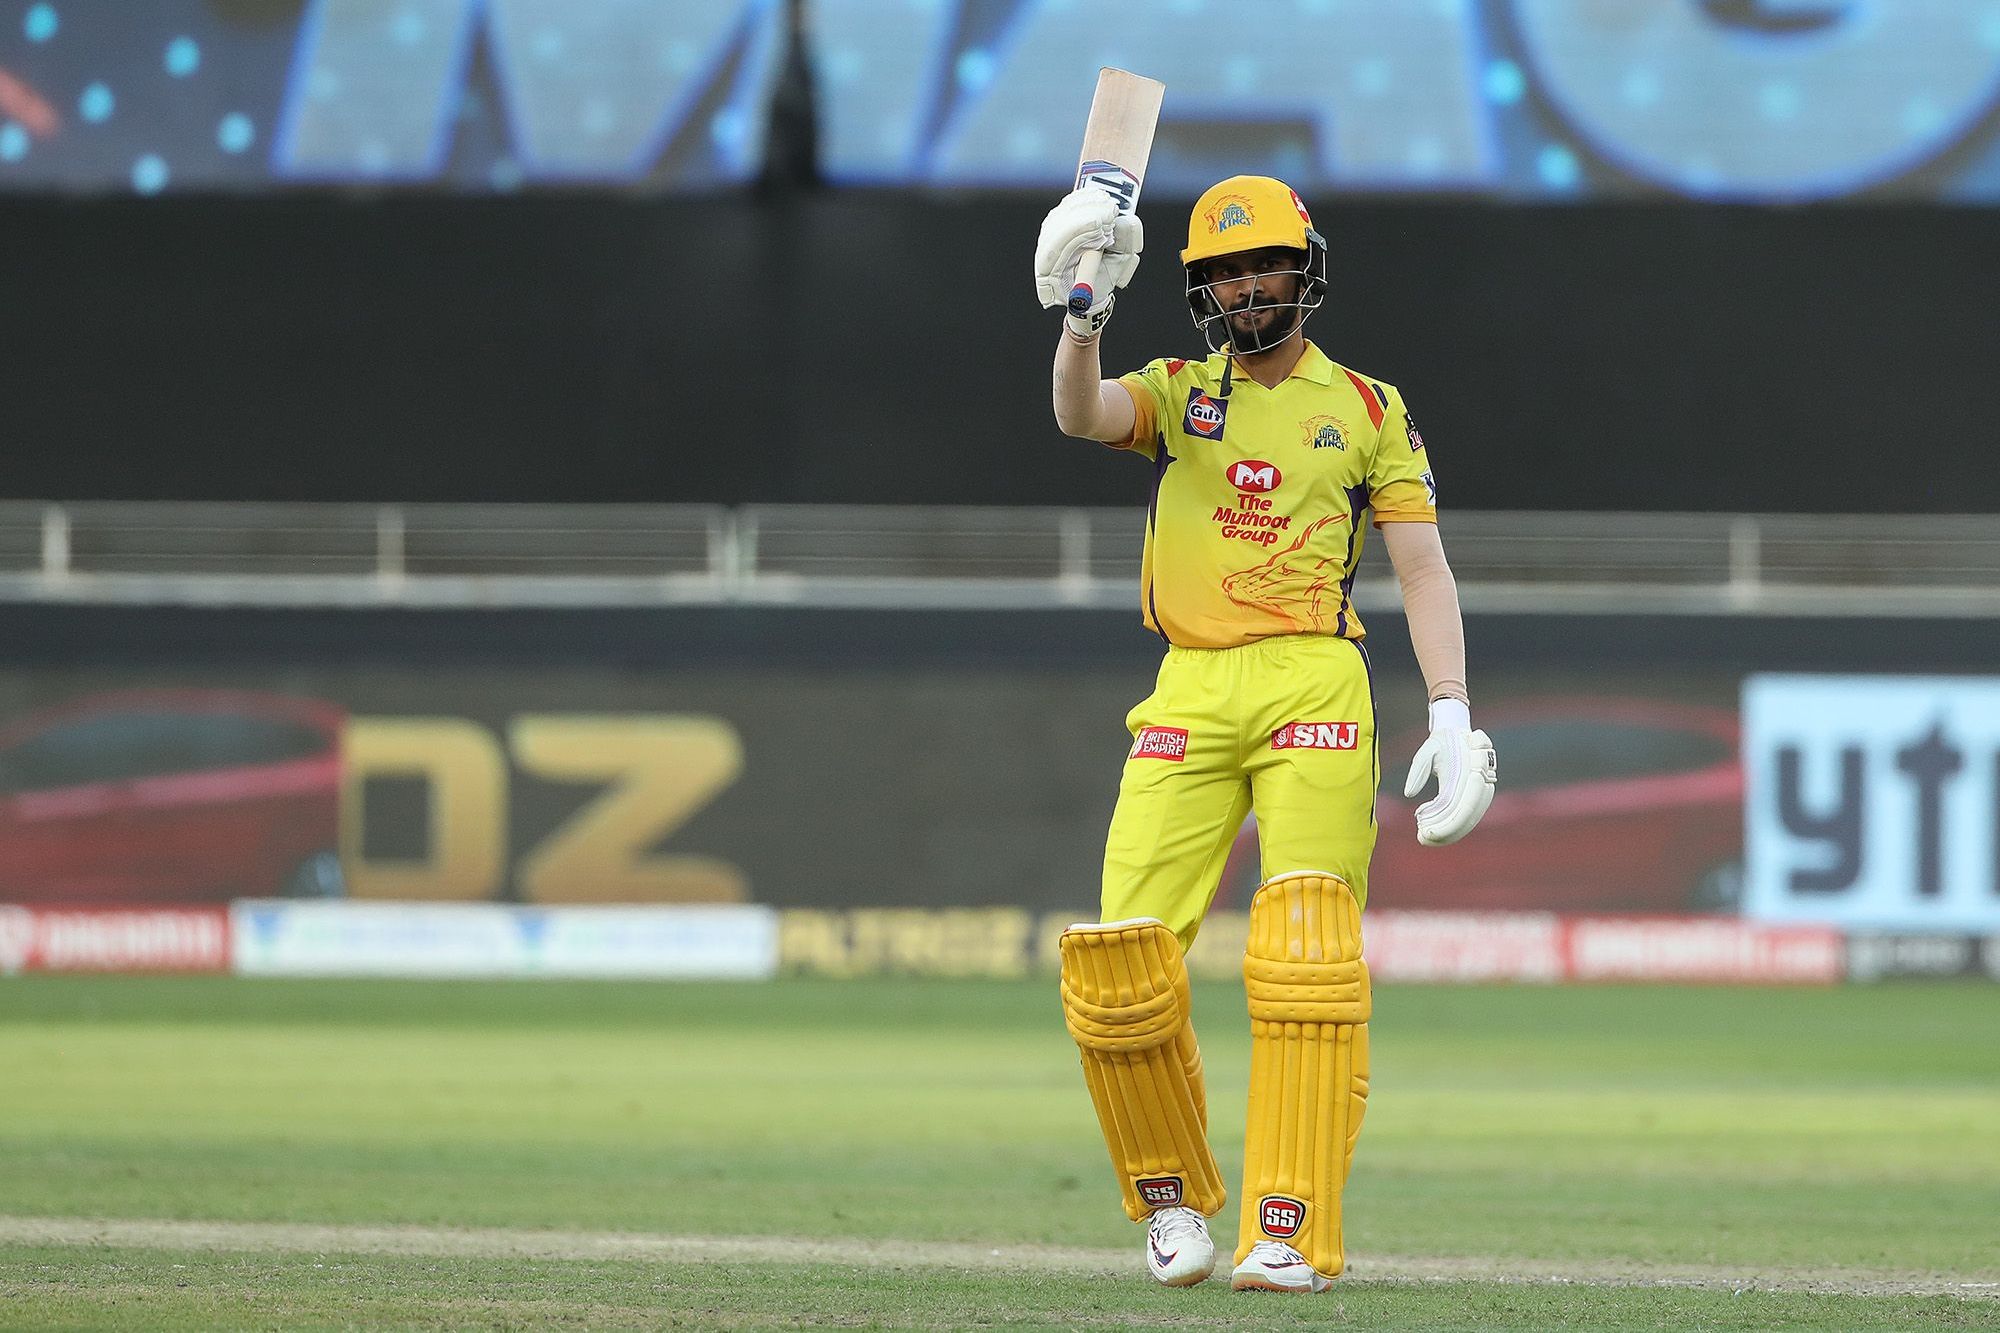 IPL 2020 | Not a single player apart from Gaikwad has shouldered the game this IPL, feels Manoj Tiwary